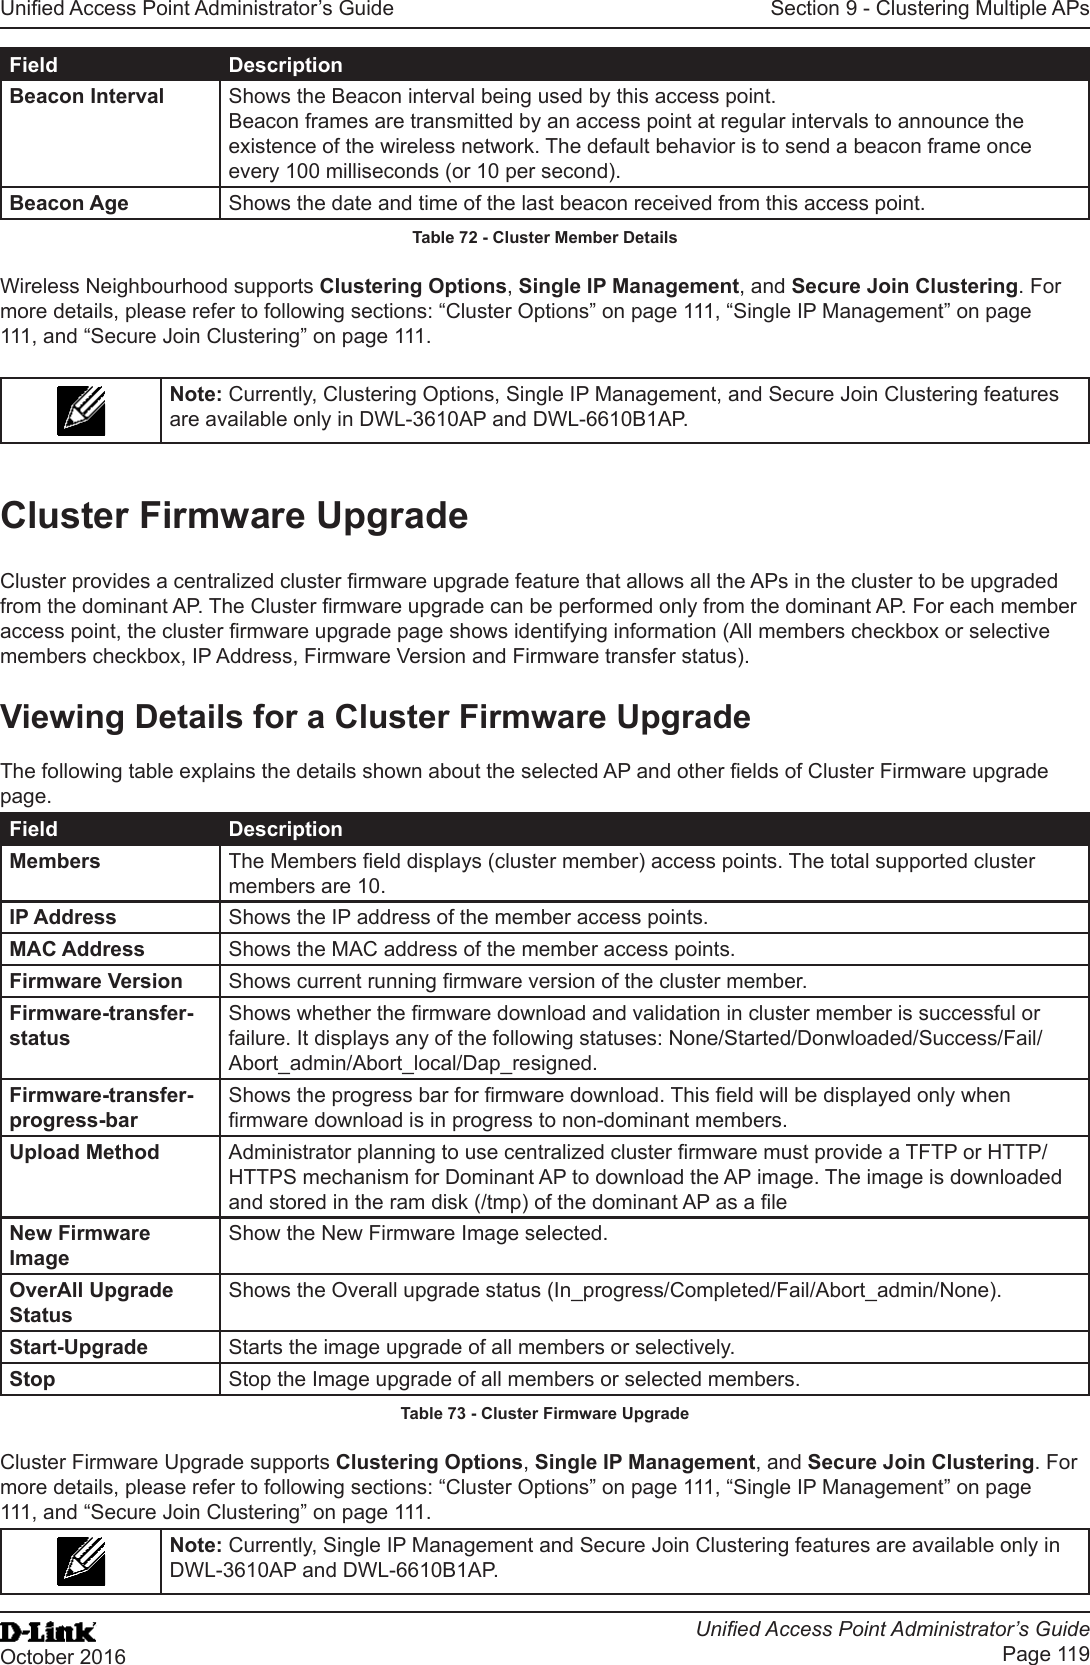 Unied Access Point Administrator’s GuideUnied Access Point Administrator’s GuidePage 119October 2016Section 9 - Clustering Multiple APsField DescriptionBeacon Interval Shows the Beacon interval being used by this access point.Beacon frames are transmitted by an access point at regular intervals to announce the existence of the wireless network. The default behavior is to send a beacon frame once every 100 milliseconds (or 10 per second).Beacon Age Shows the date and time of the last beacon received from this access point.Table 72 - Cluster Member DetailsWireless Neighbourhood supports Clustering Options, Single IP Management, and Secure Join Clustering. For more details, please refer to following sections: “Cluster Options” on page 111, “Single IP Management” on page 111, and “Secure Join Clustering” on page 111.Note: Currently, Clustering Options, Single IP Management, and Secure Join Clustering features are available only in DWL-3610AP and DWL-6610B1AP.Cluster Firmware UpgradeCluster provides a centralized cluster rmware upgrade feature that allows all the APs in the cluster to be upgraded from the dominant AP. The Cluster rmware upgrade can be performed only from the dominant AP. For each member access point, the cluster rmware upgrade page shows identifying information (All members checkbox or selective members checkbox, IP Address, Firmware Version and Firmware transfer status).Viewing Details for a Cluster Firmware UpgradeThe following table explains the details shown about the selected AP and other elds of Cluster Firmware upgrade page.Field DescriptionMembers The Members eld displays (cluster member) access points. The total supported cluster members are 10.IP Address Shows the IP address of the member access points.MAC Address Shows the MAC address of the member access points.Firmware Version Shows current running rmware version of the cluster member.Firmware-transfer-statusShows whether the rmware download and validation in cluster member is successful or failure. It displays any of the following statuses: None/Started/Donwloaded/Success/Fail/Abort_admin/Abort_local/Dap_resigned.Firmware-transfer-progress-barShows the progress bar for rmware download. This eld will be displayed only when rmware download is in progress to non-dominant members.Upload Method Administrator planning to use centralized cluster rmware must provide a TFTP or HTTP/HTTPS mechanism for Dominant AP to download the AP image. The image is downloaded and stored in the ram disk (/tmp) of the dominant AP as a leNew Firmware ImageShow the New Firmware Image selected.OverAll Upgrade StatusShows the Overall upgrade status (In_progress/Completed/Fail/Abort_admin/None).Start-Upgrade Starts the image upgrade of all members or selectively.Stop Stop the Image upgrade of all members or selected members.Table 73 - Cluster Firmware UpgradeCluster Firmware Upgrade supports Clustering Options, Single IP Management, and Secure Join Clustering. For more details, please refer to following sections: “Cluster Options” on page 111, “Single IP Management” on page 111, and “Secure Join Clustering” on page 111.Note: Currently, Single IP Management and Secure Join Clustering features are available only in DWL-3610AP and DWL-6610B1AP.